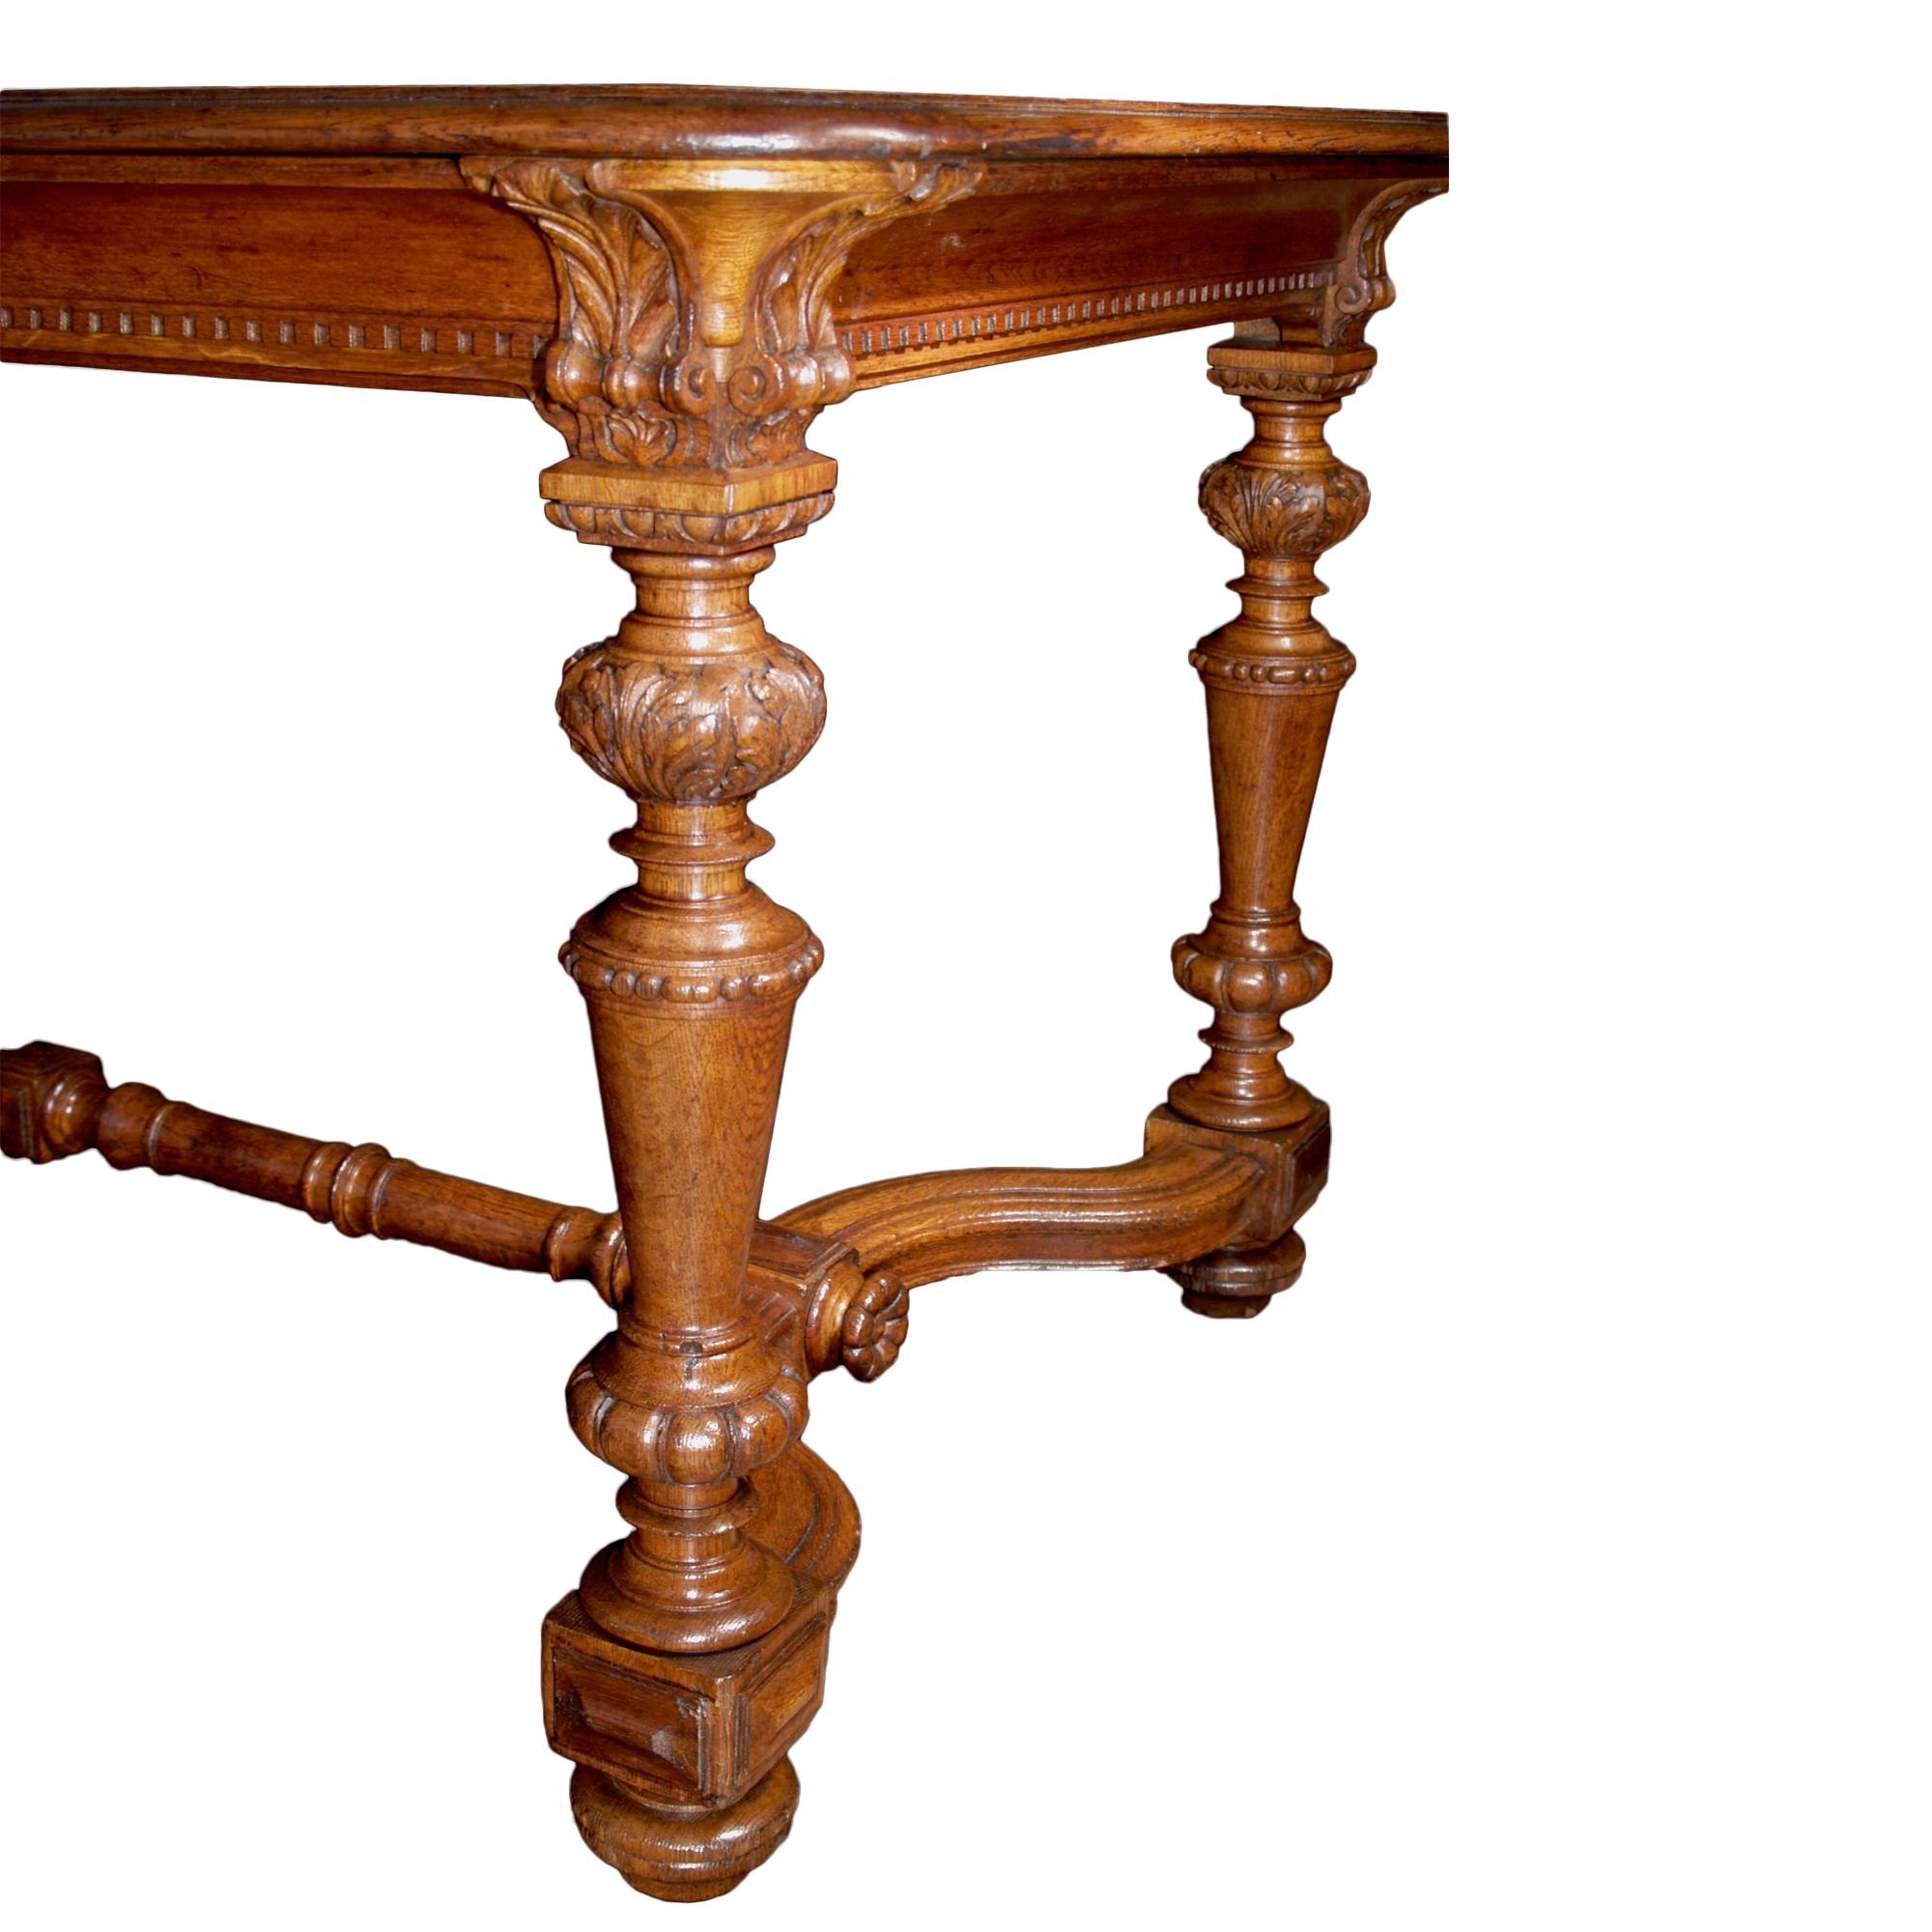 An attractive country French 19th century Louis XIV st. Honey-colored oak center/dining table. The legs with a Corinthian capitol-like carvings have baluster shapes decorated by acorn leaves ending by 'boule' shaped supports above the original brass